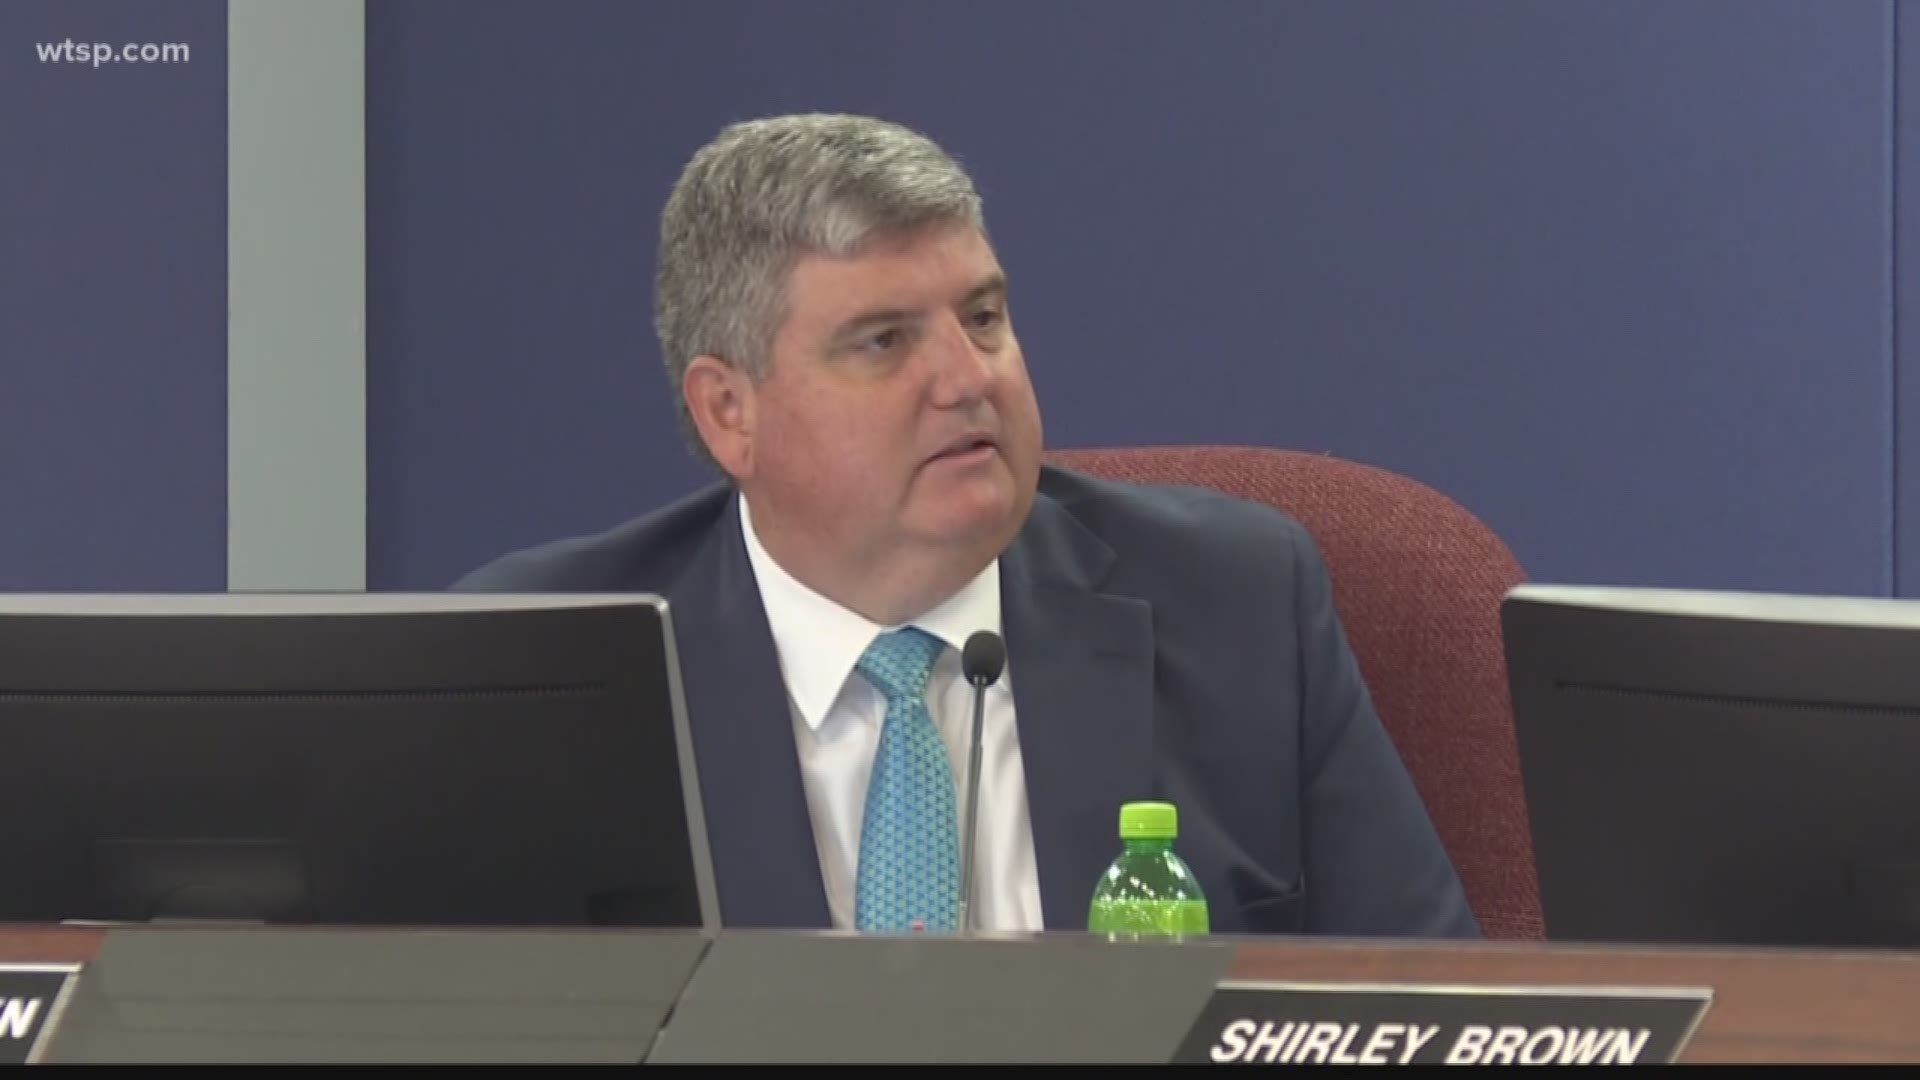 The Sarasota School Board has reached a mutual agreement to part ways with embattled superintendent Todd Bowden. https://bit.ly/2KeddTP